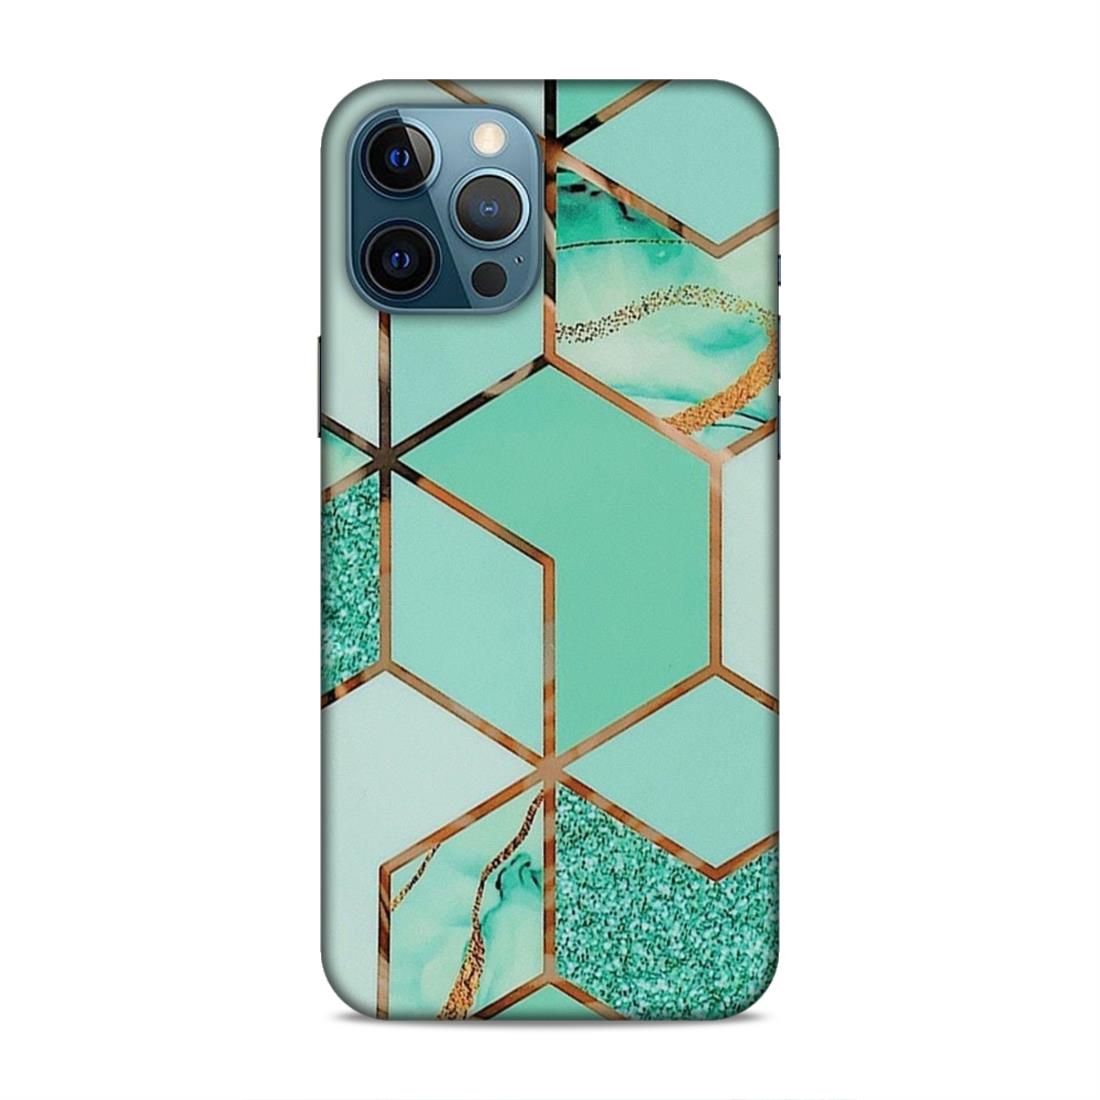 Hexagonal Marble Pattern Hard Back Case For Apple iPhone 12 Pro Max